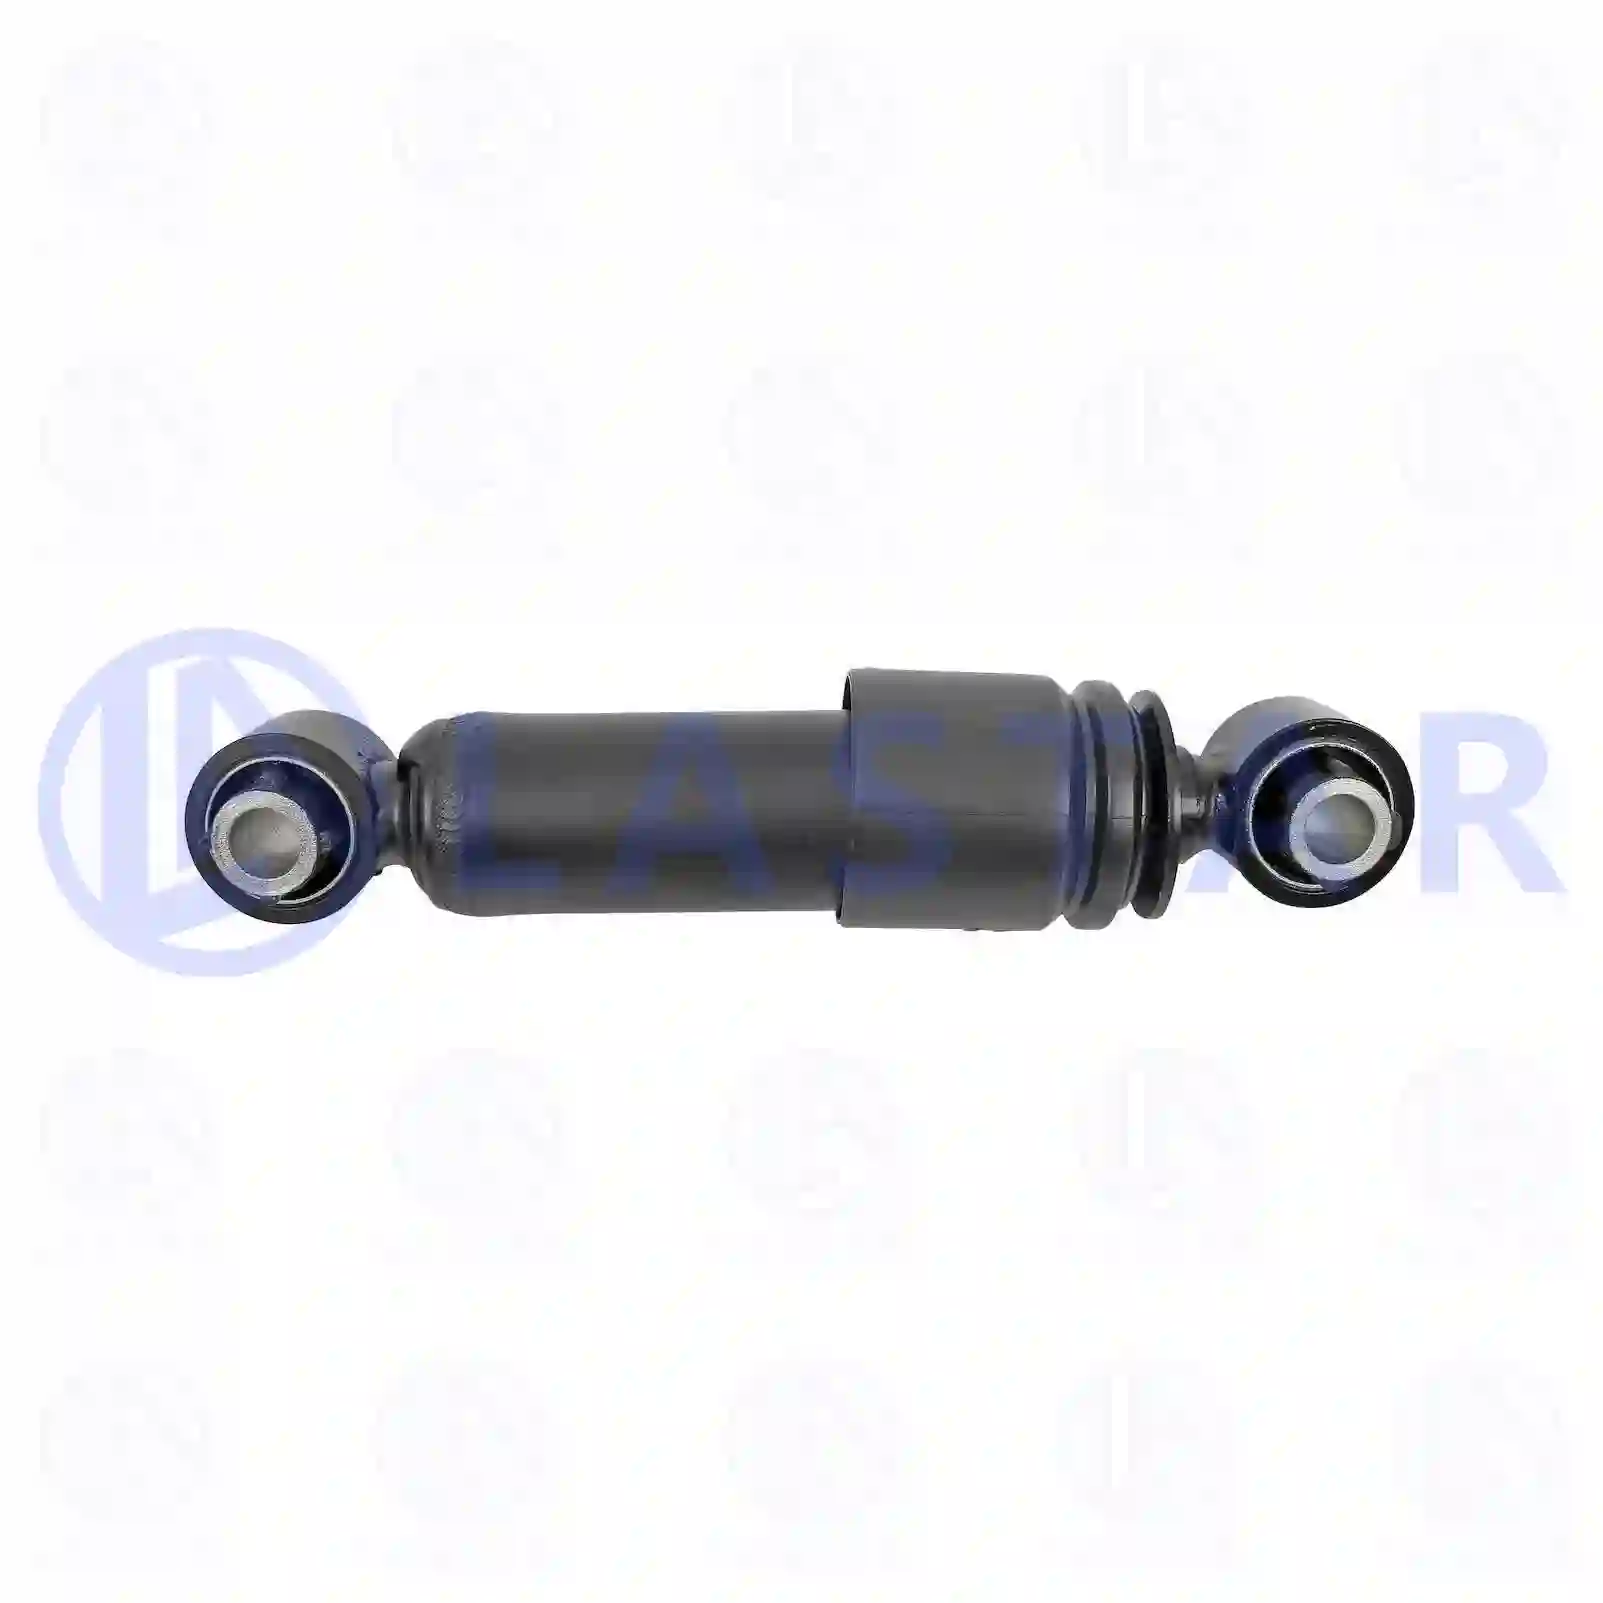 Cabin shock absorber, 77735783, 21430905, , , , ||  77735783 Lastar Spare Part | Truck Spare Parts, Auotomotive Spare Parts Cabin shock absorber, 77735783, 21430905, , , , ||  77735783 Lastar Spare Part | Truck Spare Parts, Auotomotive Spare Parts